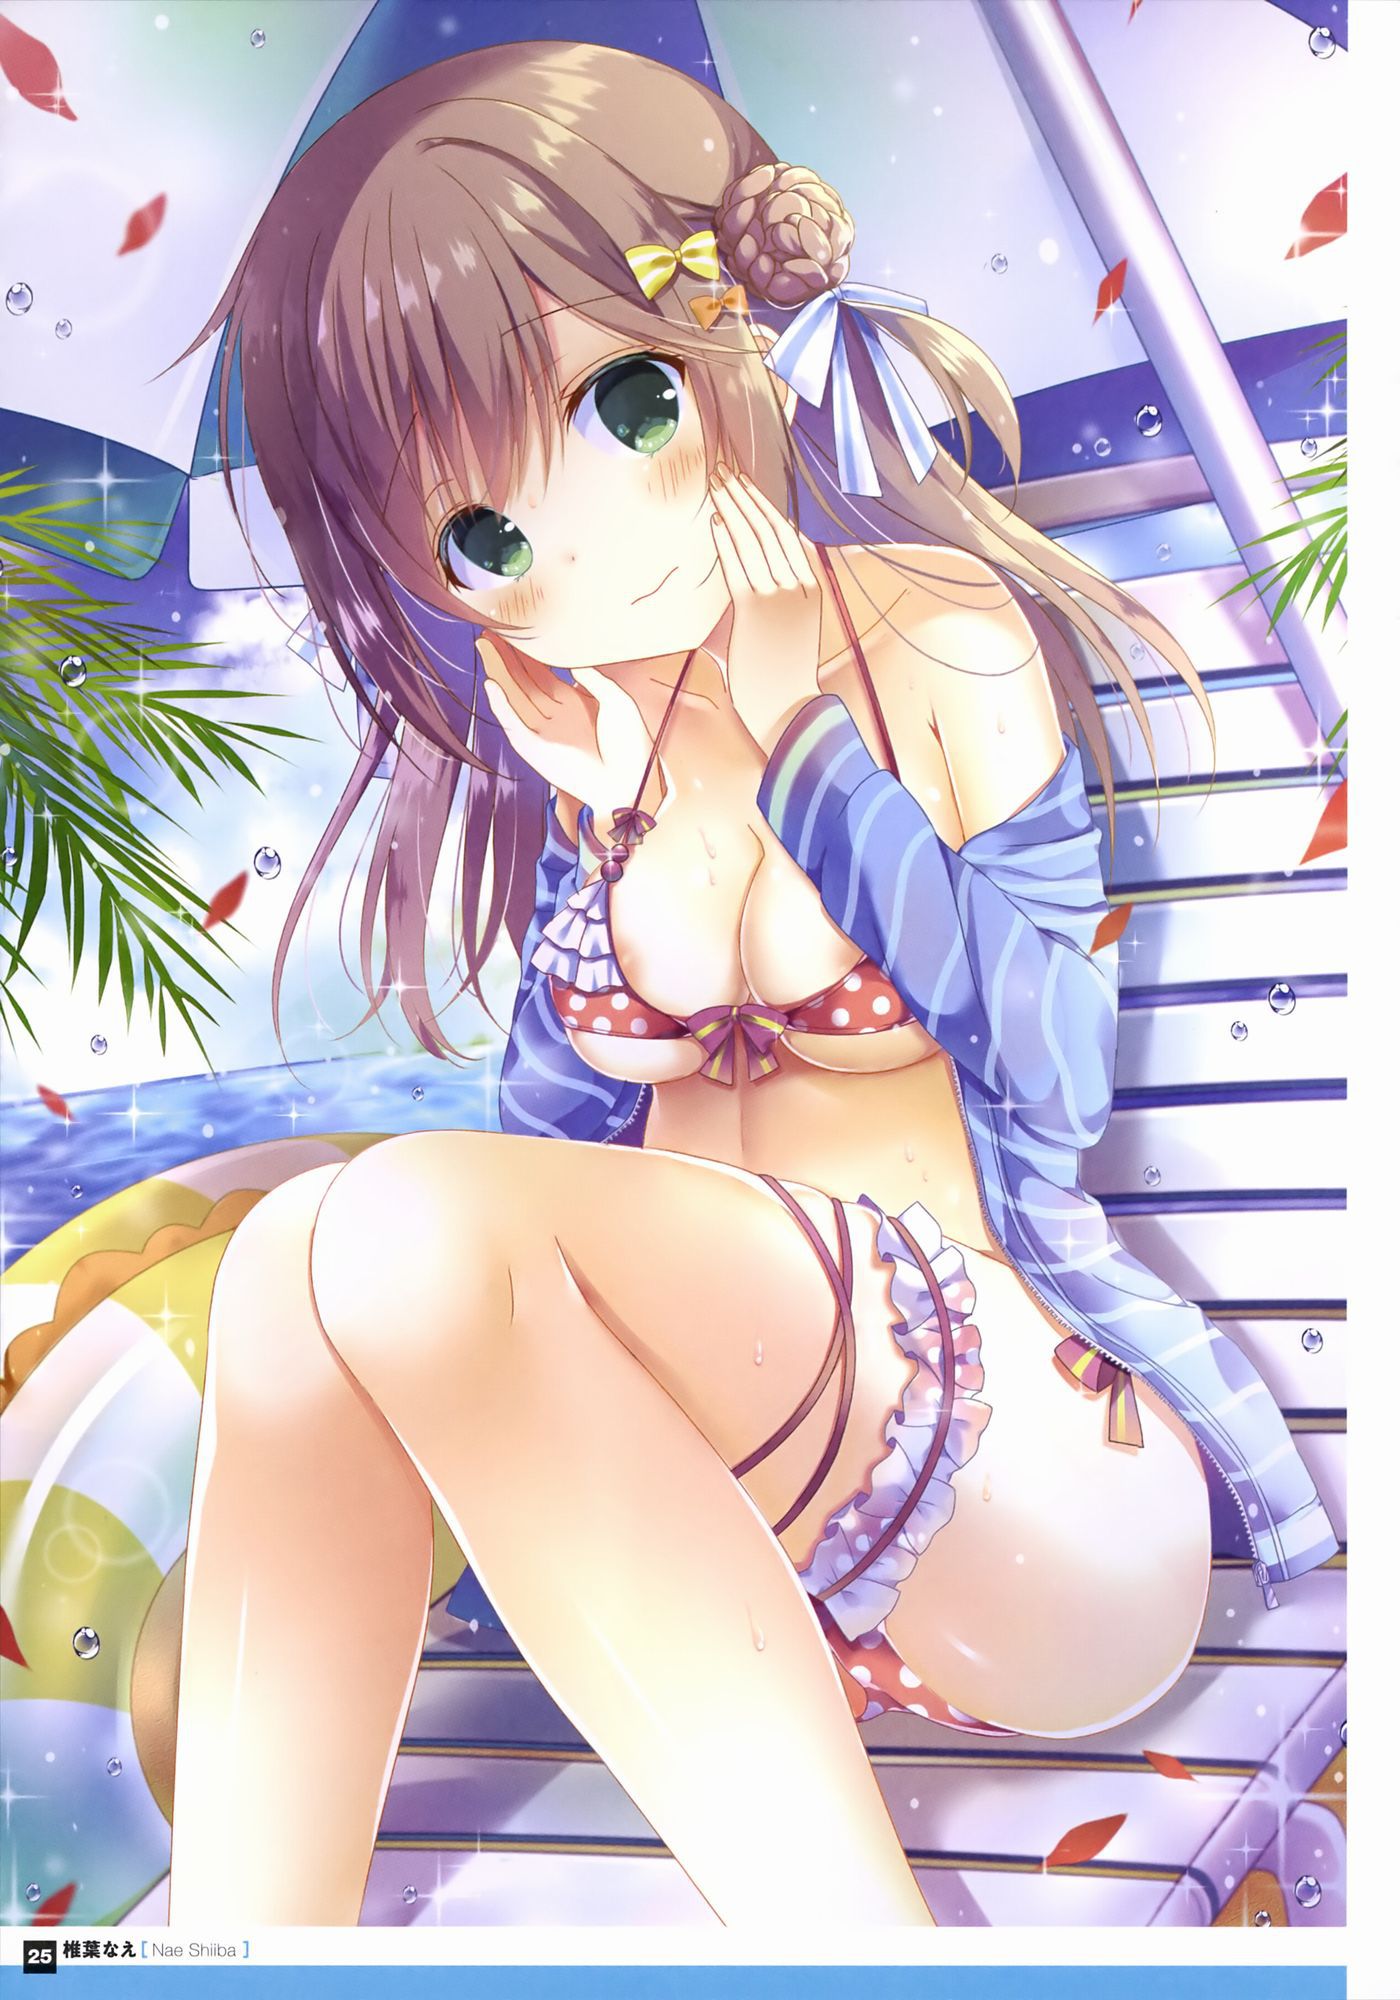 [Secondary erotic] erotic image of a girl wearing a cute swimsuit and showing off a body [50 sheets] 4